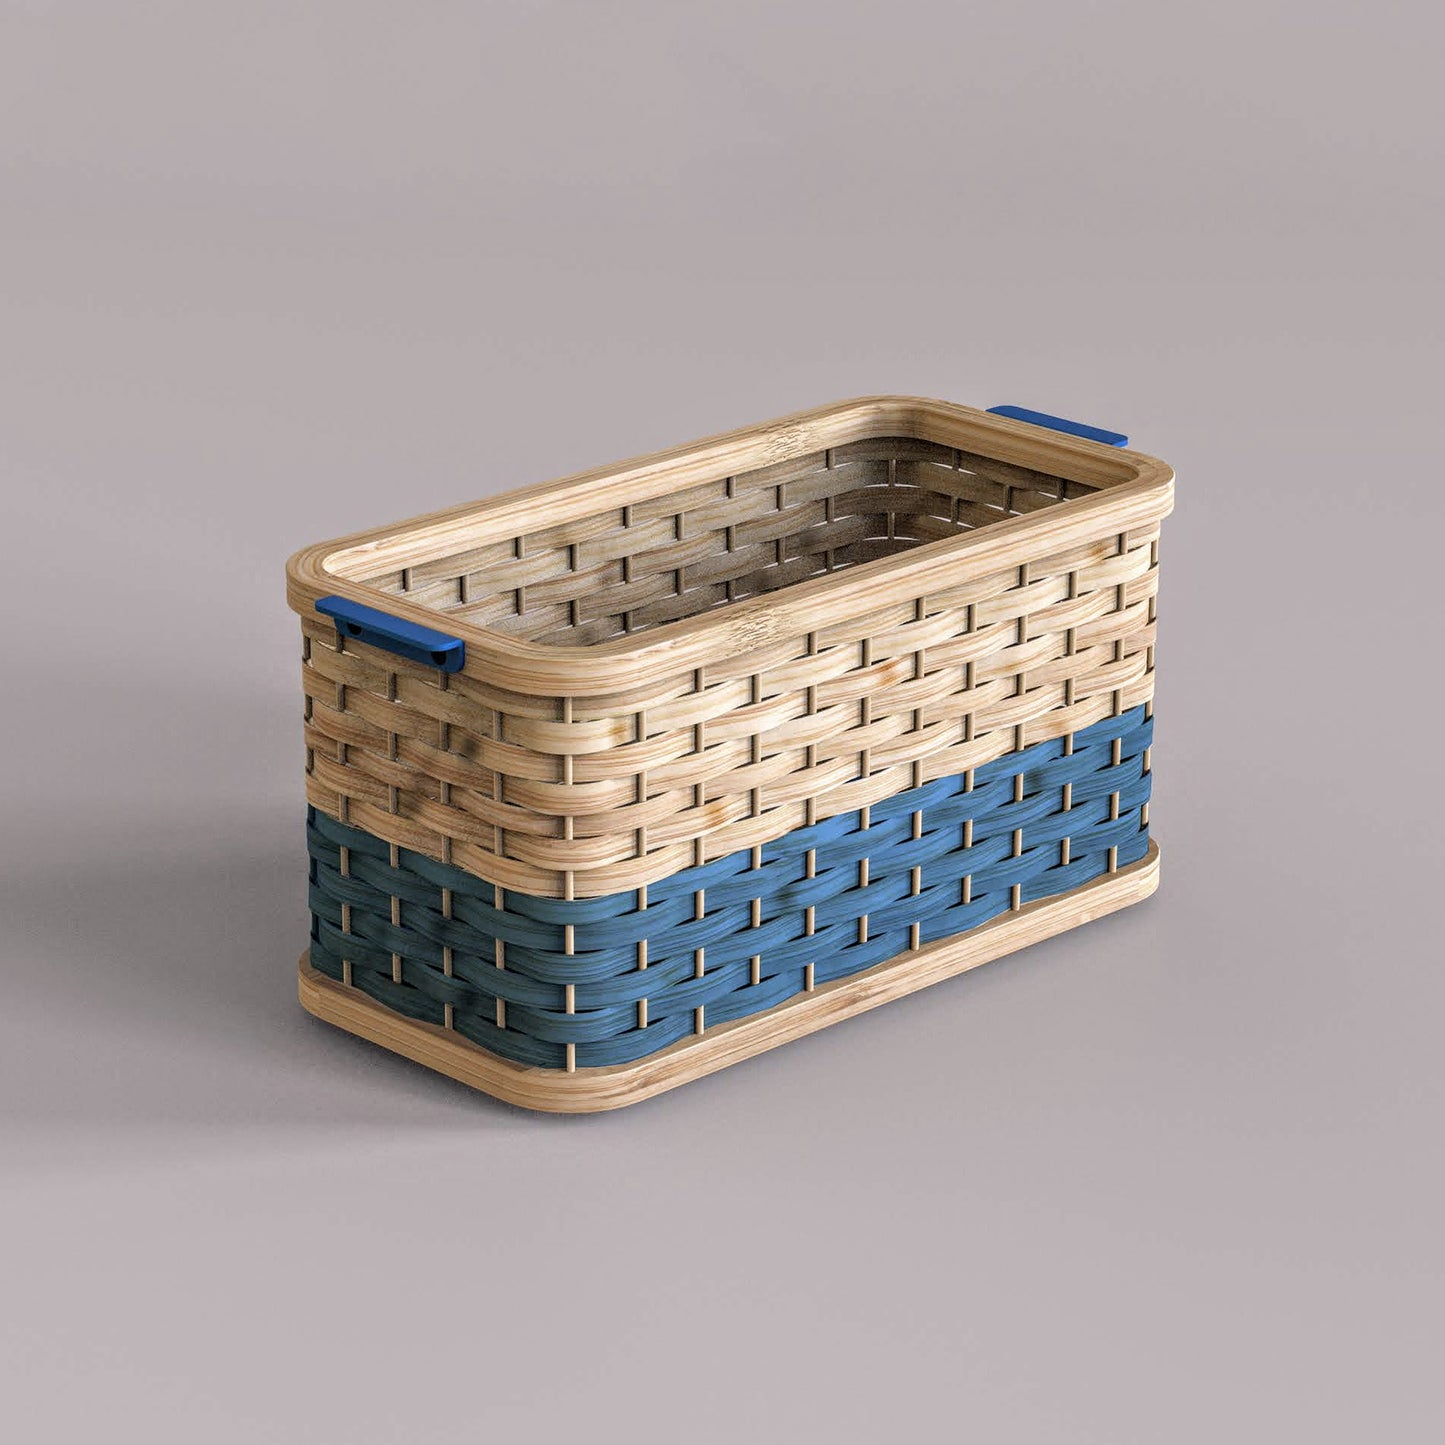 Stadium-Wicker Handwoven Storage Basket Shelf Basket Colorful Cane Bamboo Basket for Home Corporate Gifting